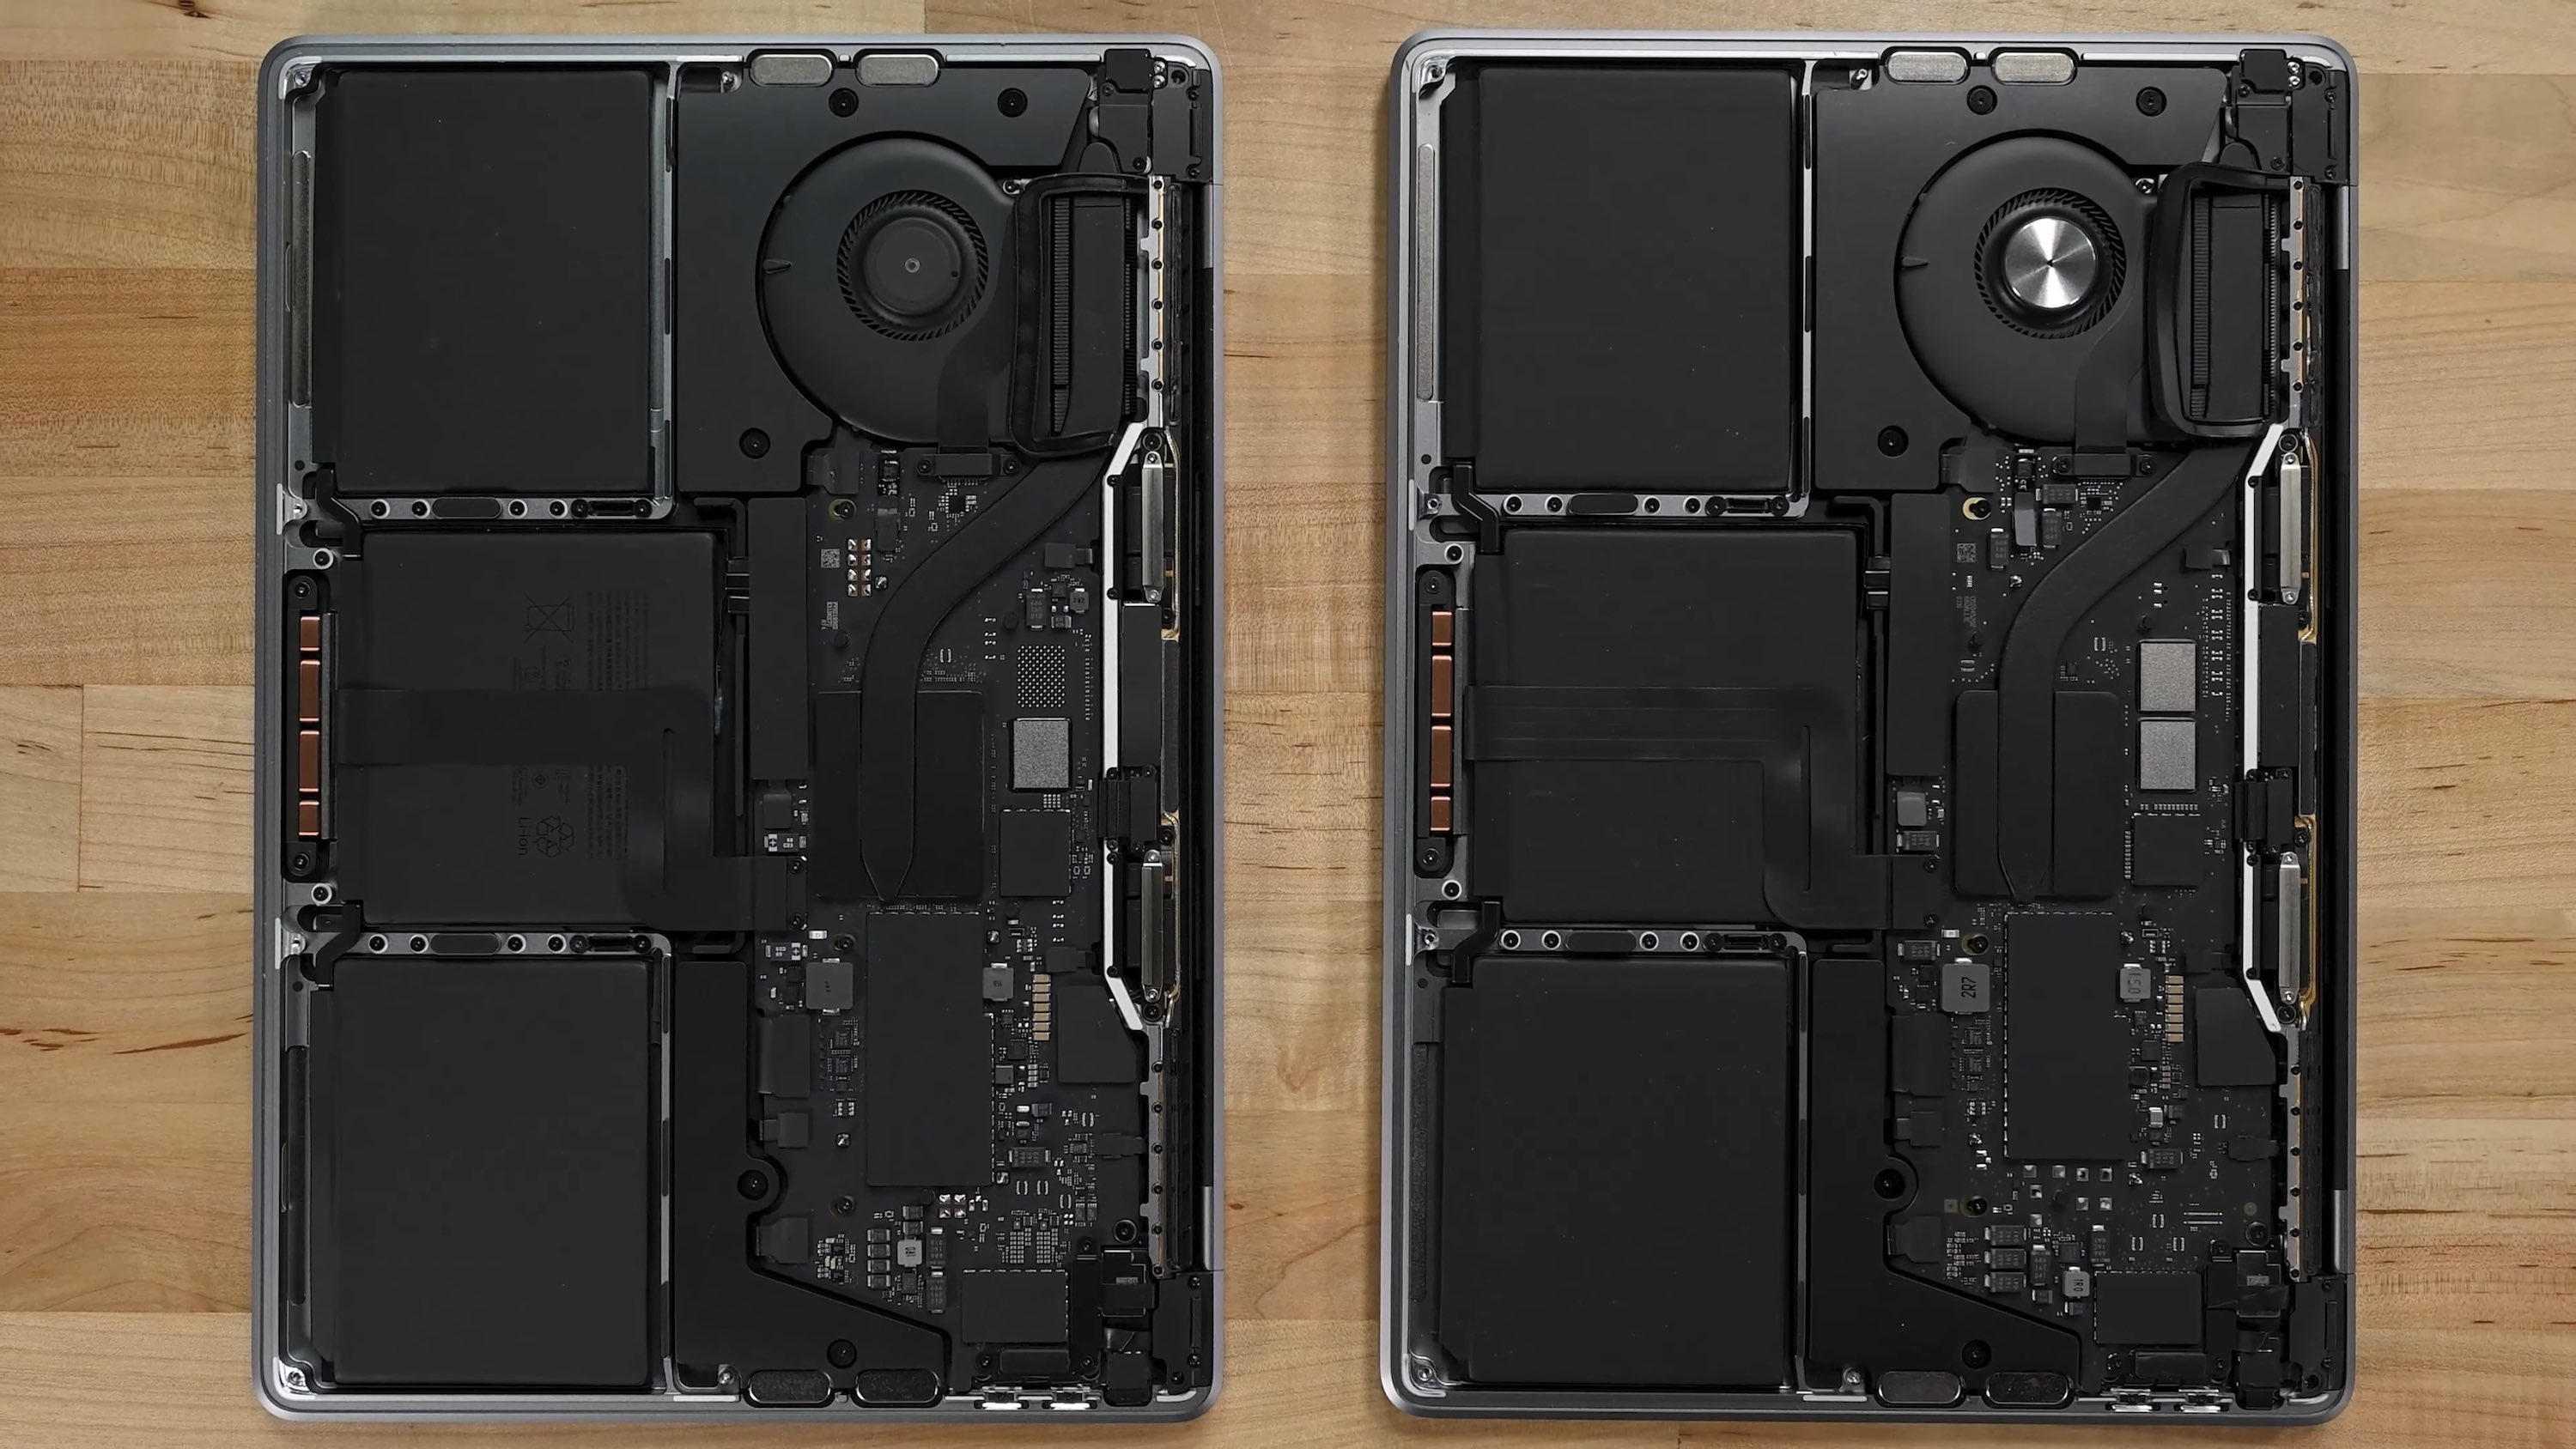 iFixit teardown shows M2 MacBook Pro is a recycled laptop - 9to5Mac